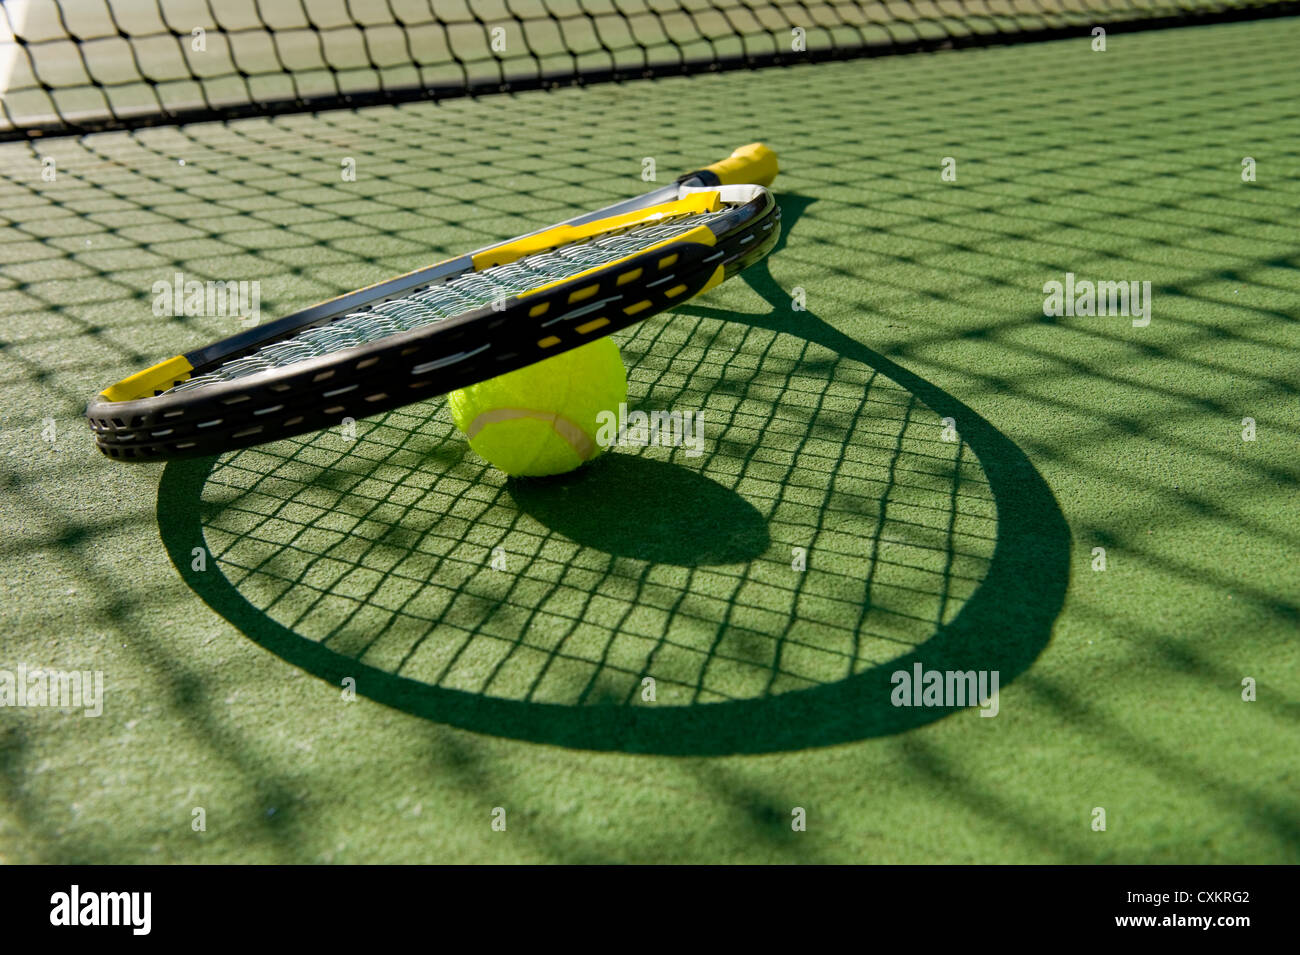 A tennis racket and new tennis ball on a freshly painted tennis court Stock Photo